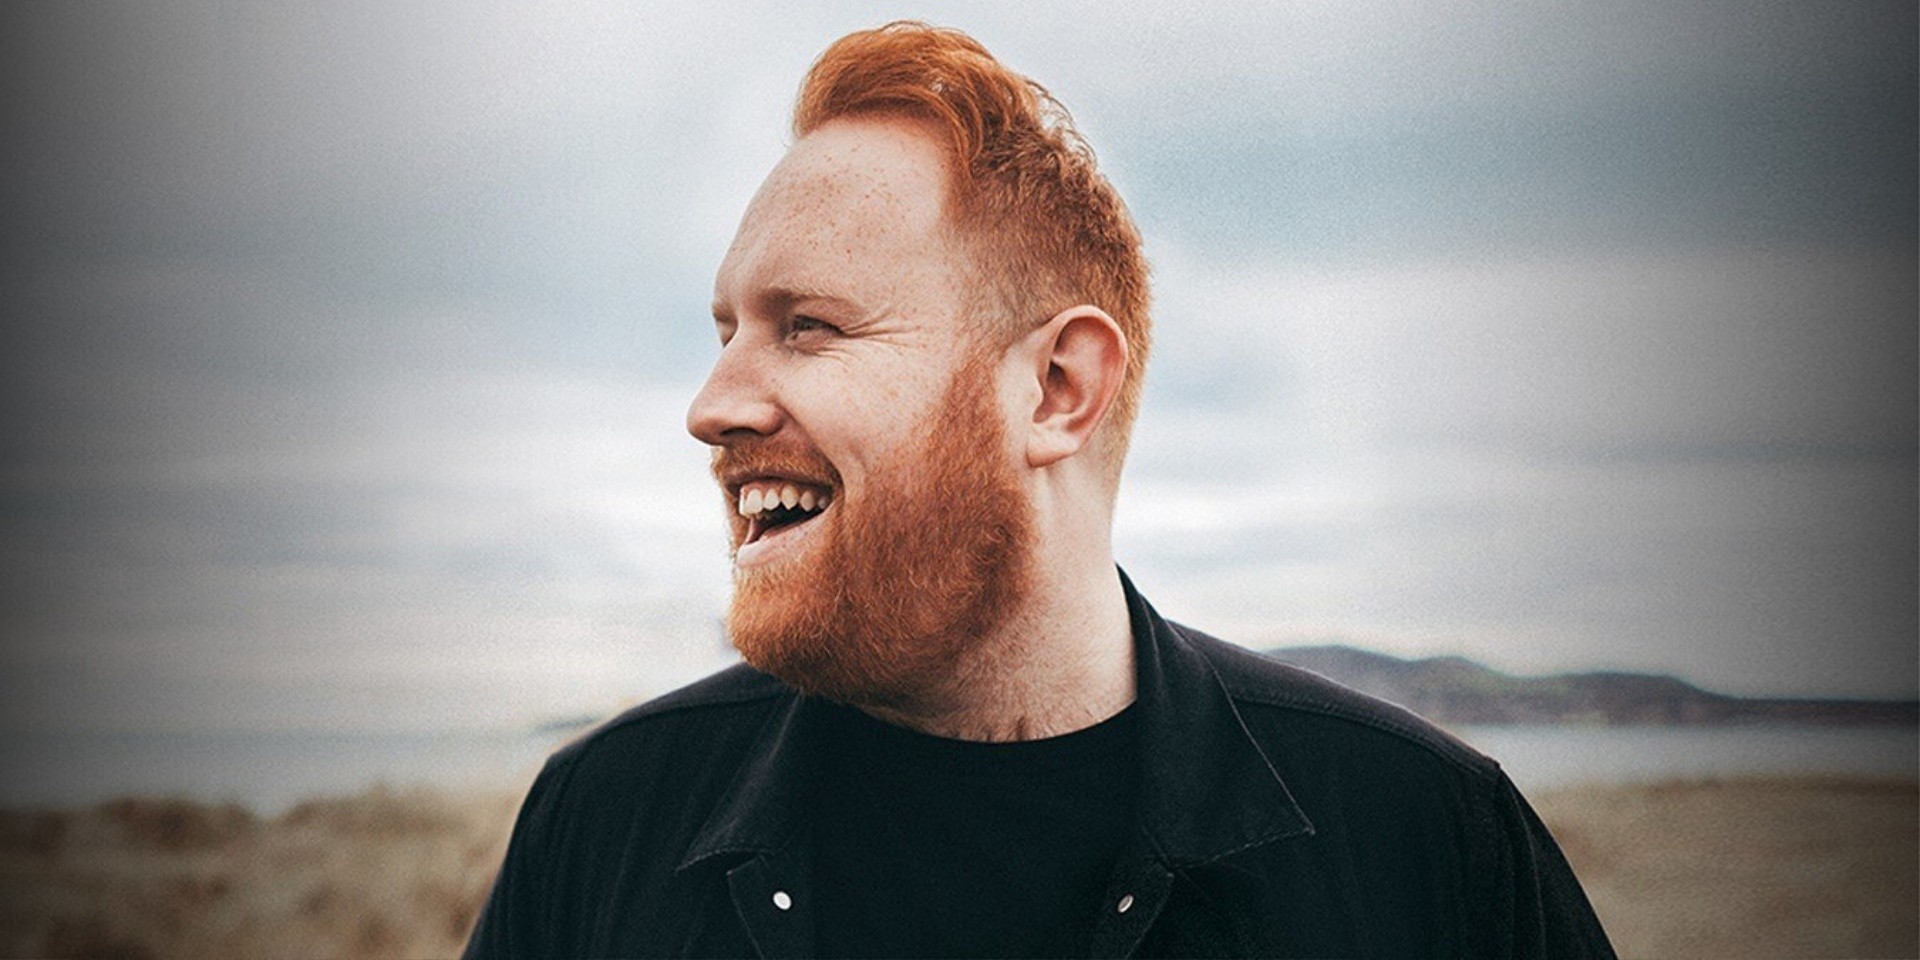 "I've always been helped out by other bands so I always try to do the same": An interview with Gavin James